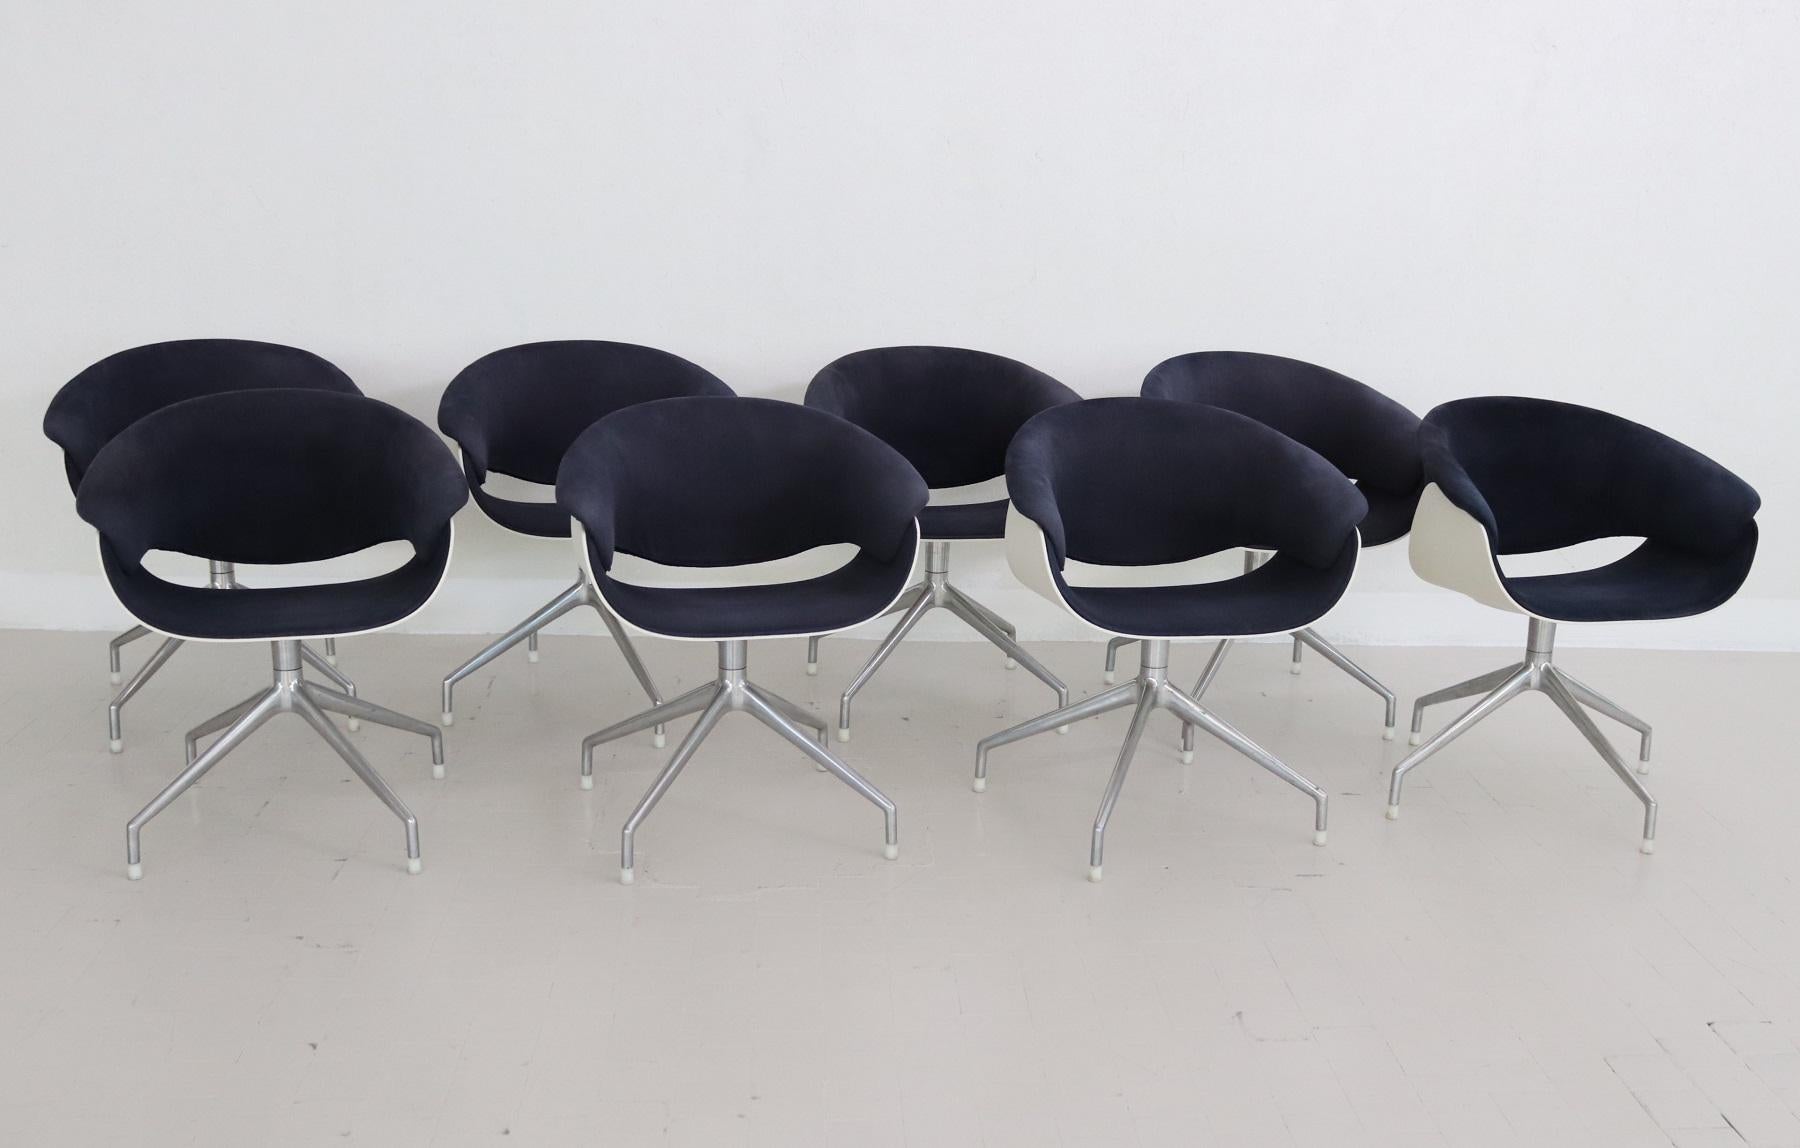 Beautiful set of eight (8) swivel chairs, suitable as dining chairs or as office chairs.
Produced by B&B Italia in 2005, Designed by Uwe Fischer, 1999.

Seat and back structure in white thermoplastic material.
Base structure (feet) in polished